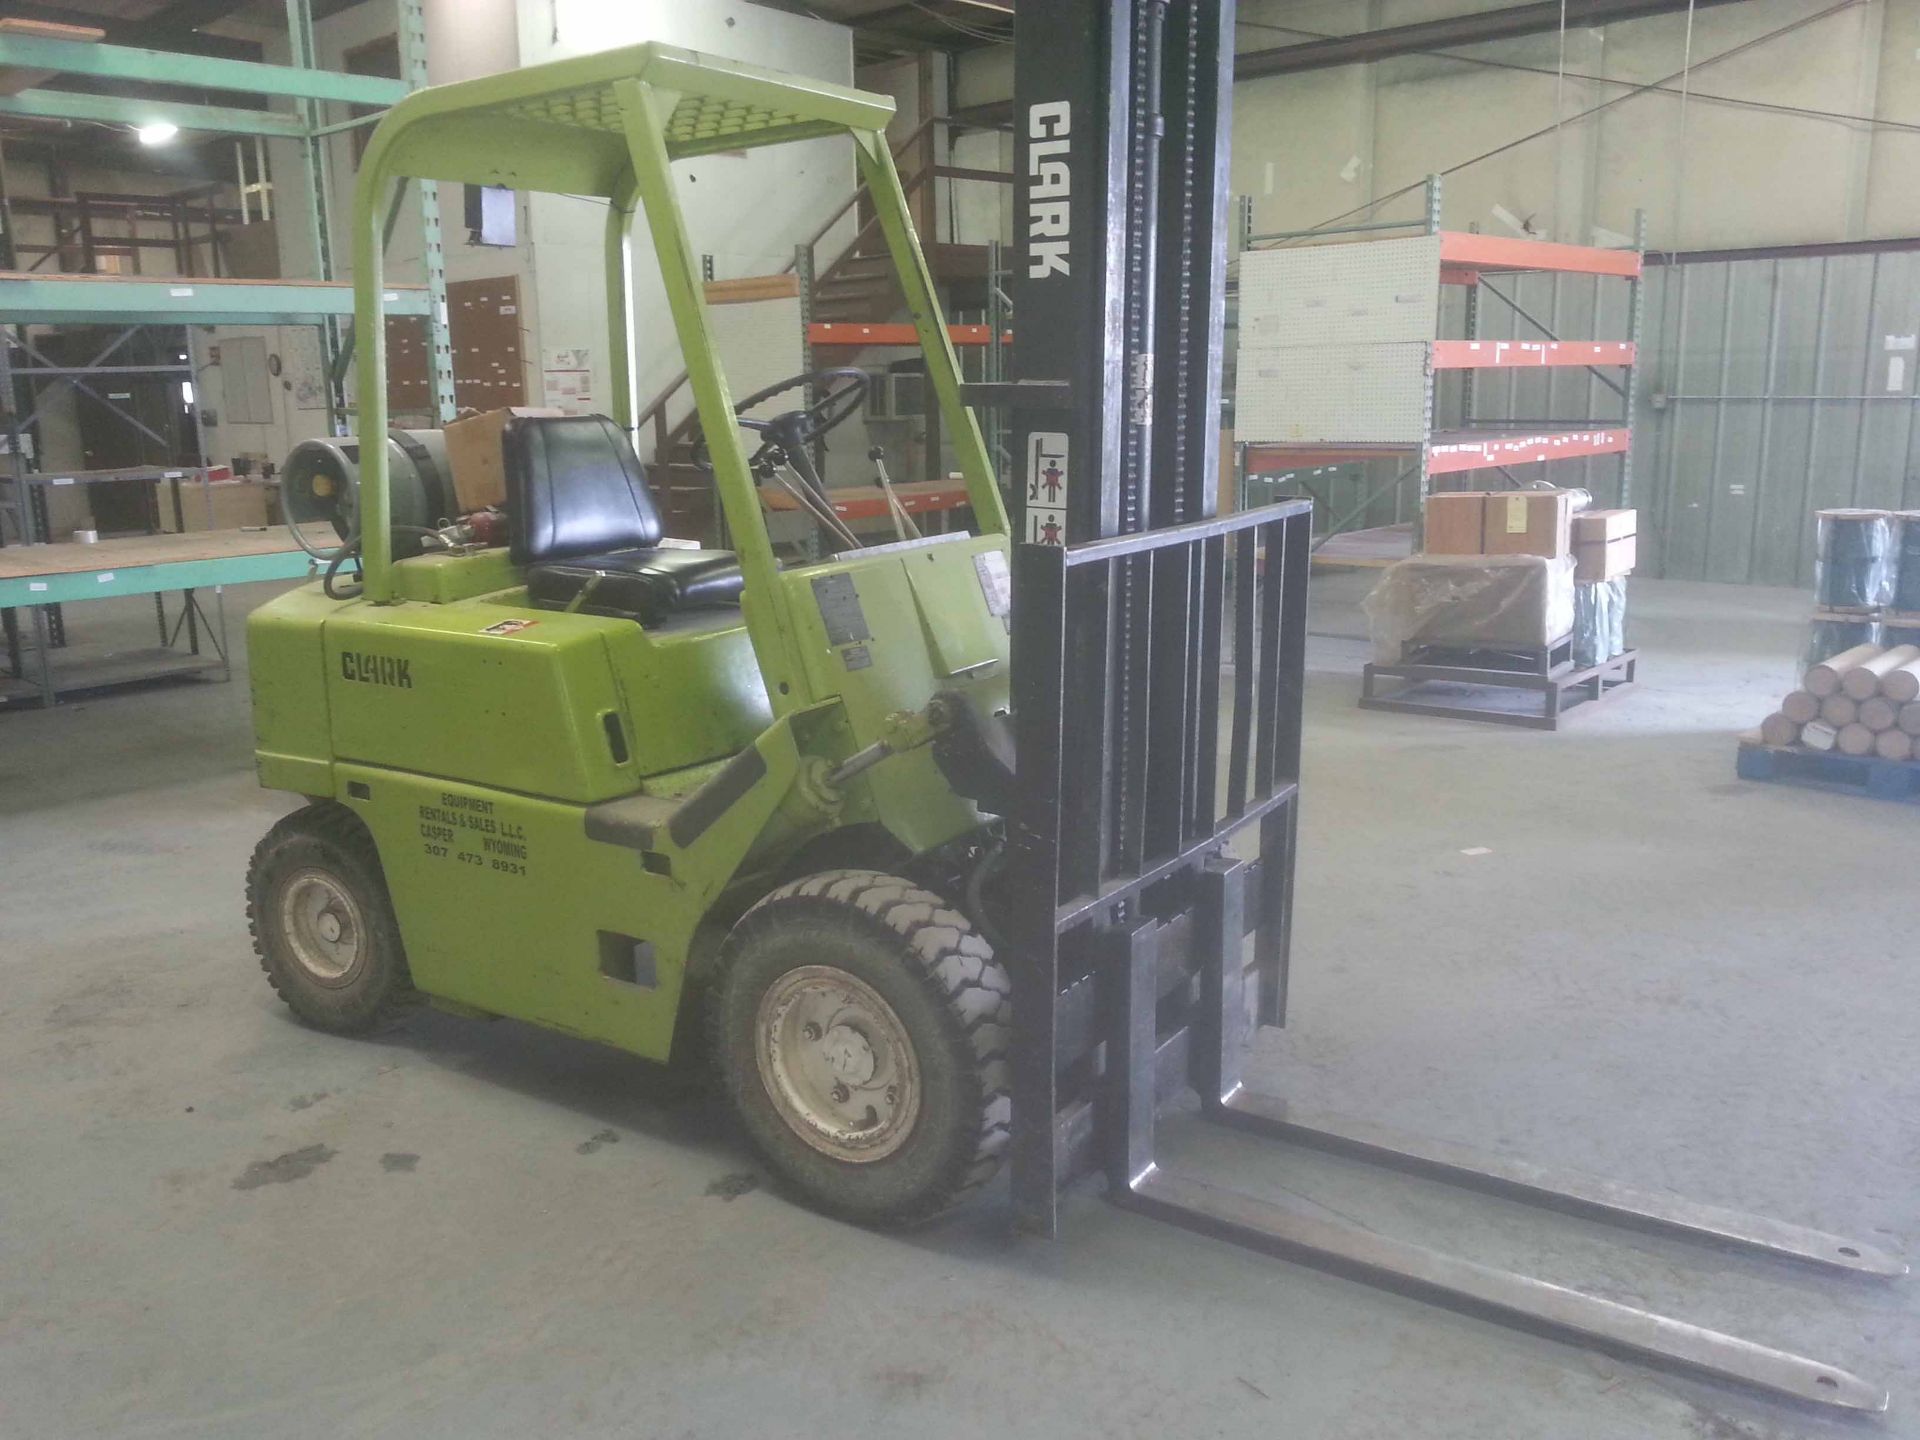 FORKLIFT, CLARK MDL. C500Y45   (delayed removal) LOCATED IN CASPER, WY